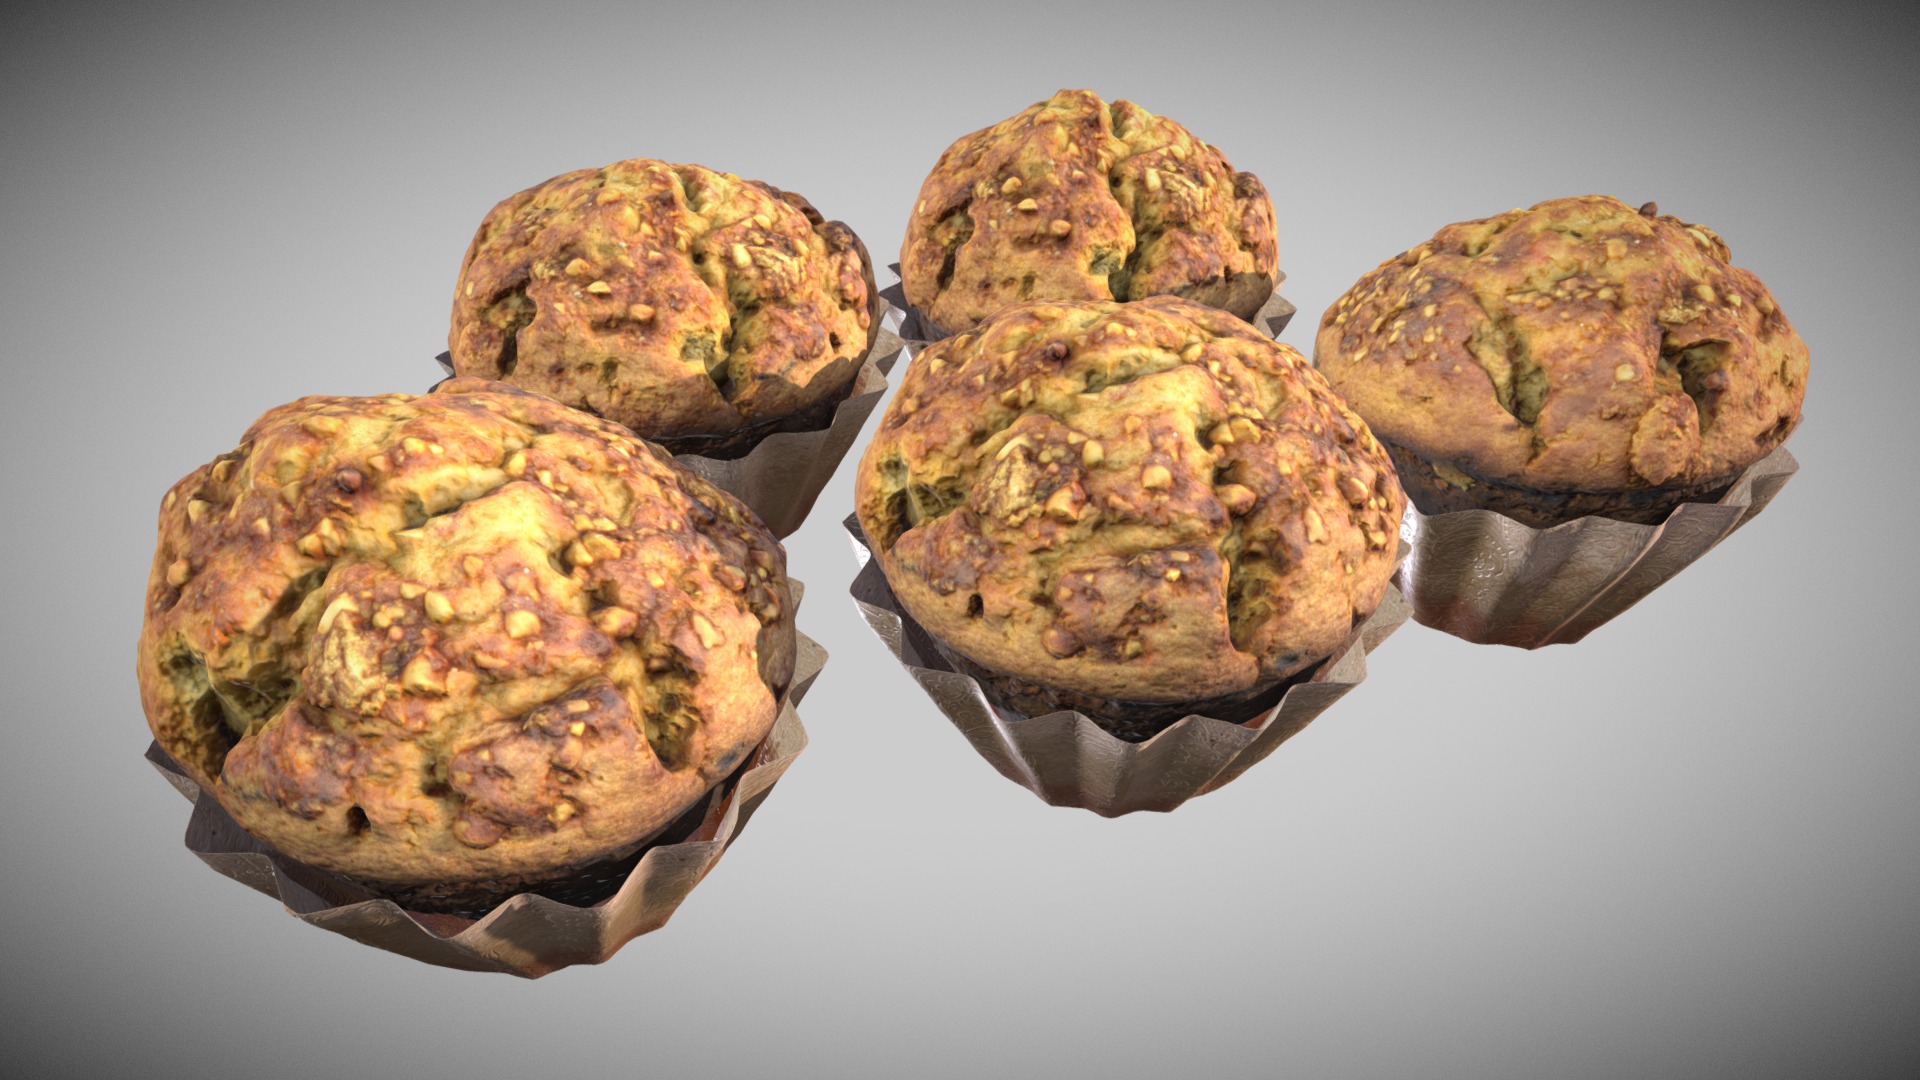 3D model Muffins - This is a 3D model of the Muffins. The 3D model is about a group of round brown objects.